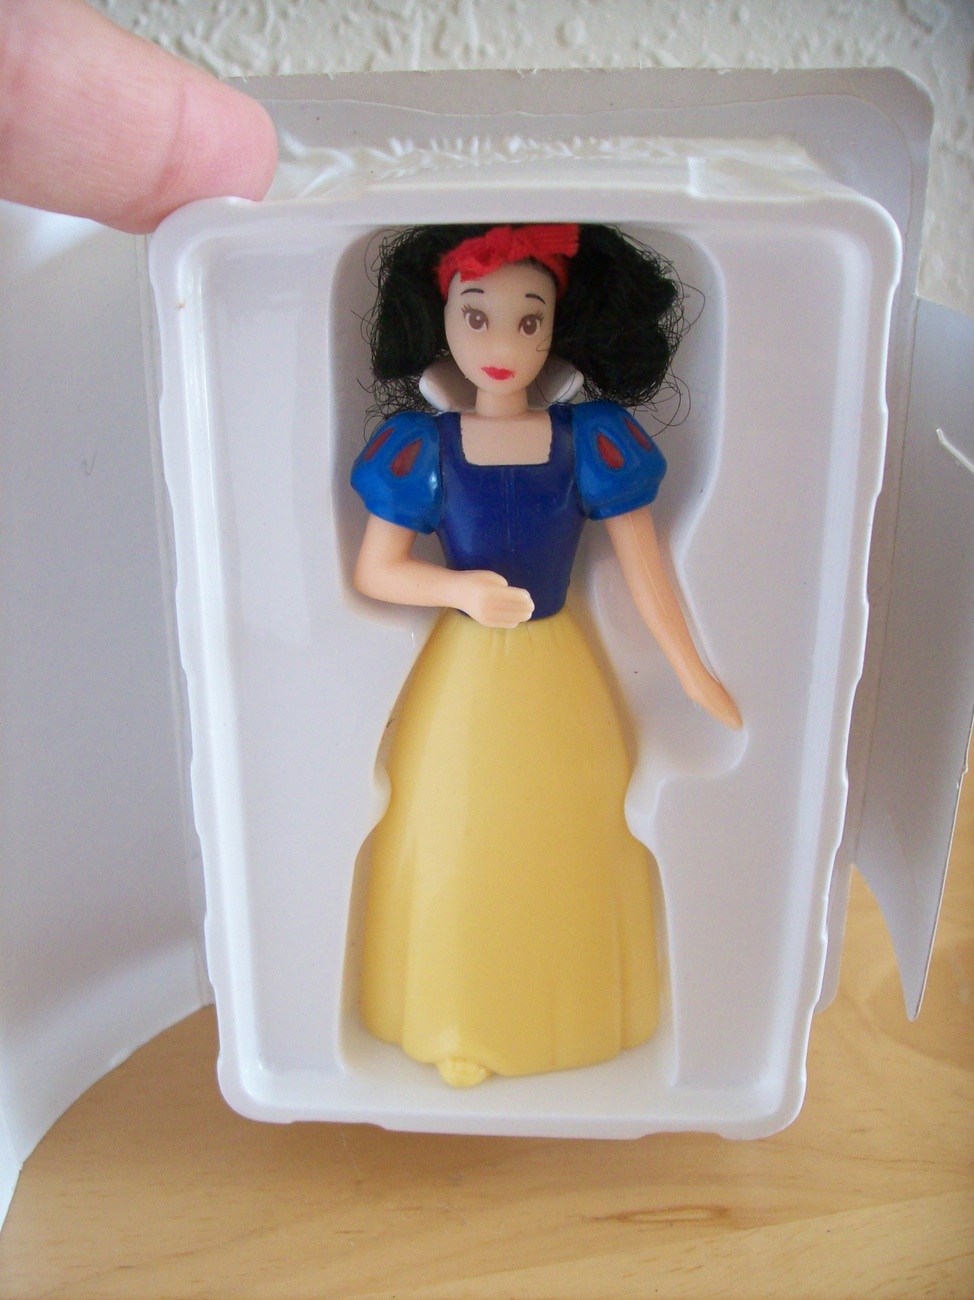 1995 Disney Mcdonalds 5 “snow White And The Seven Dwarfs” Happy Meal Fig Fast Food 